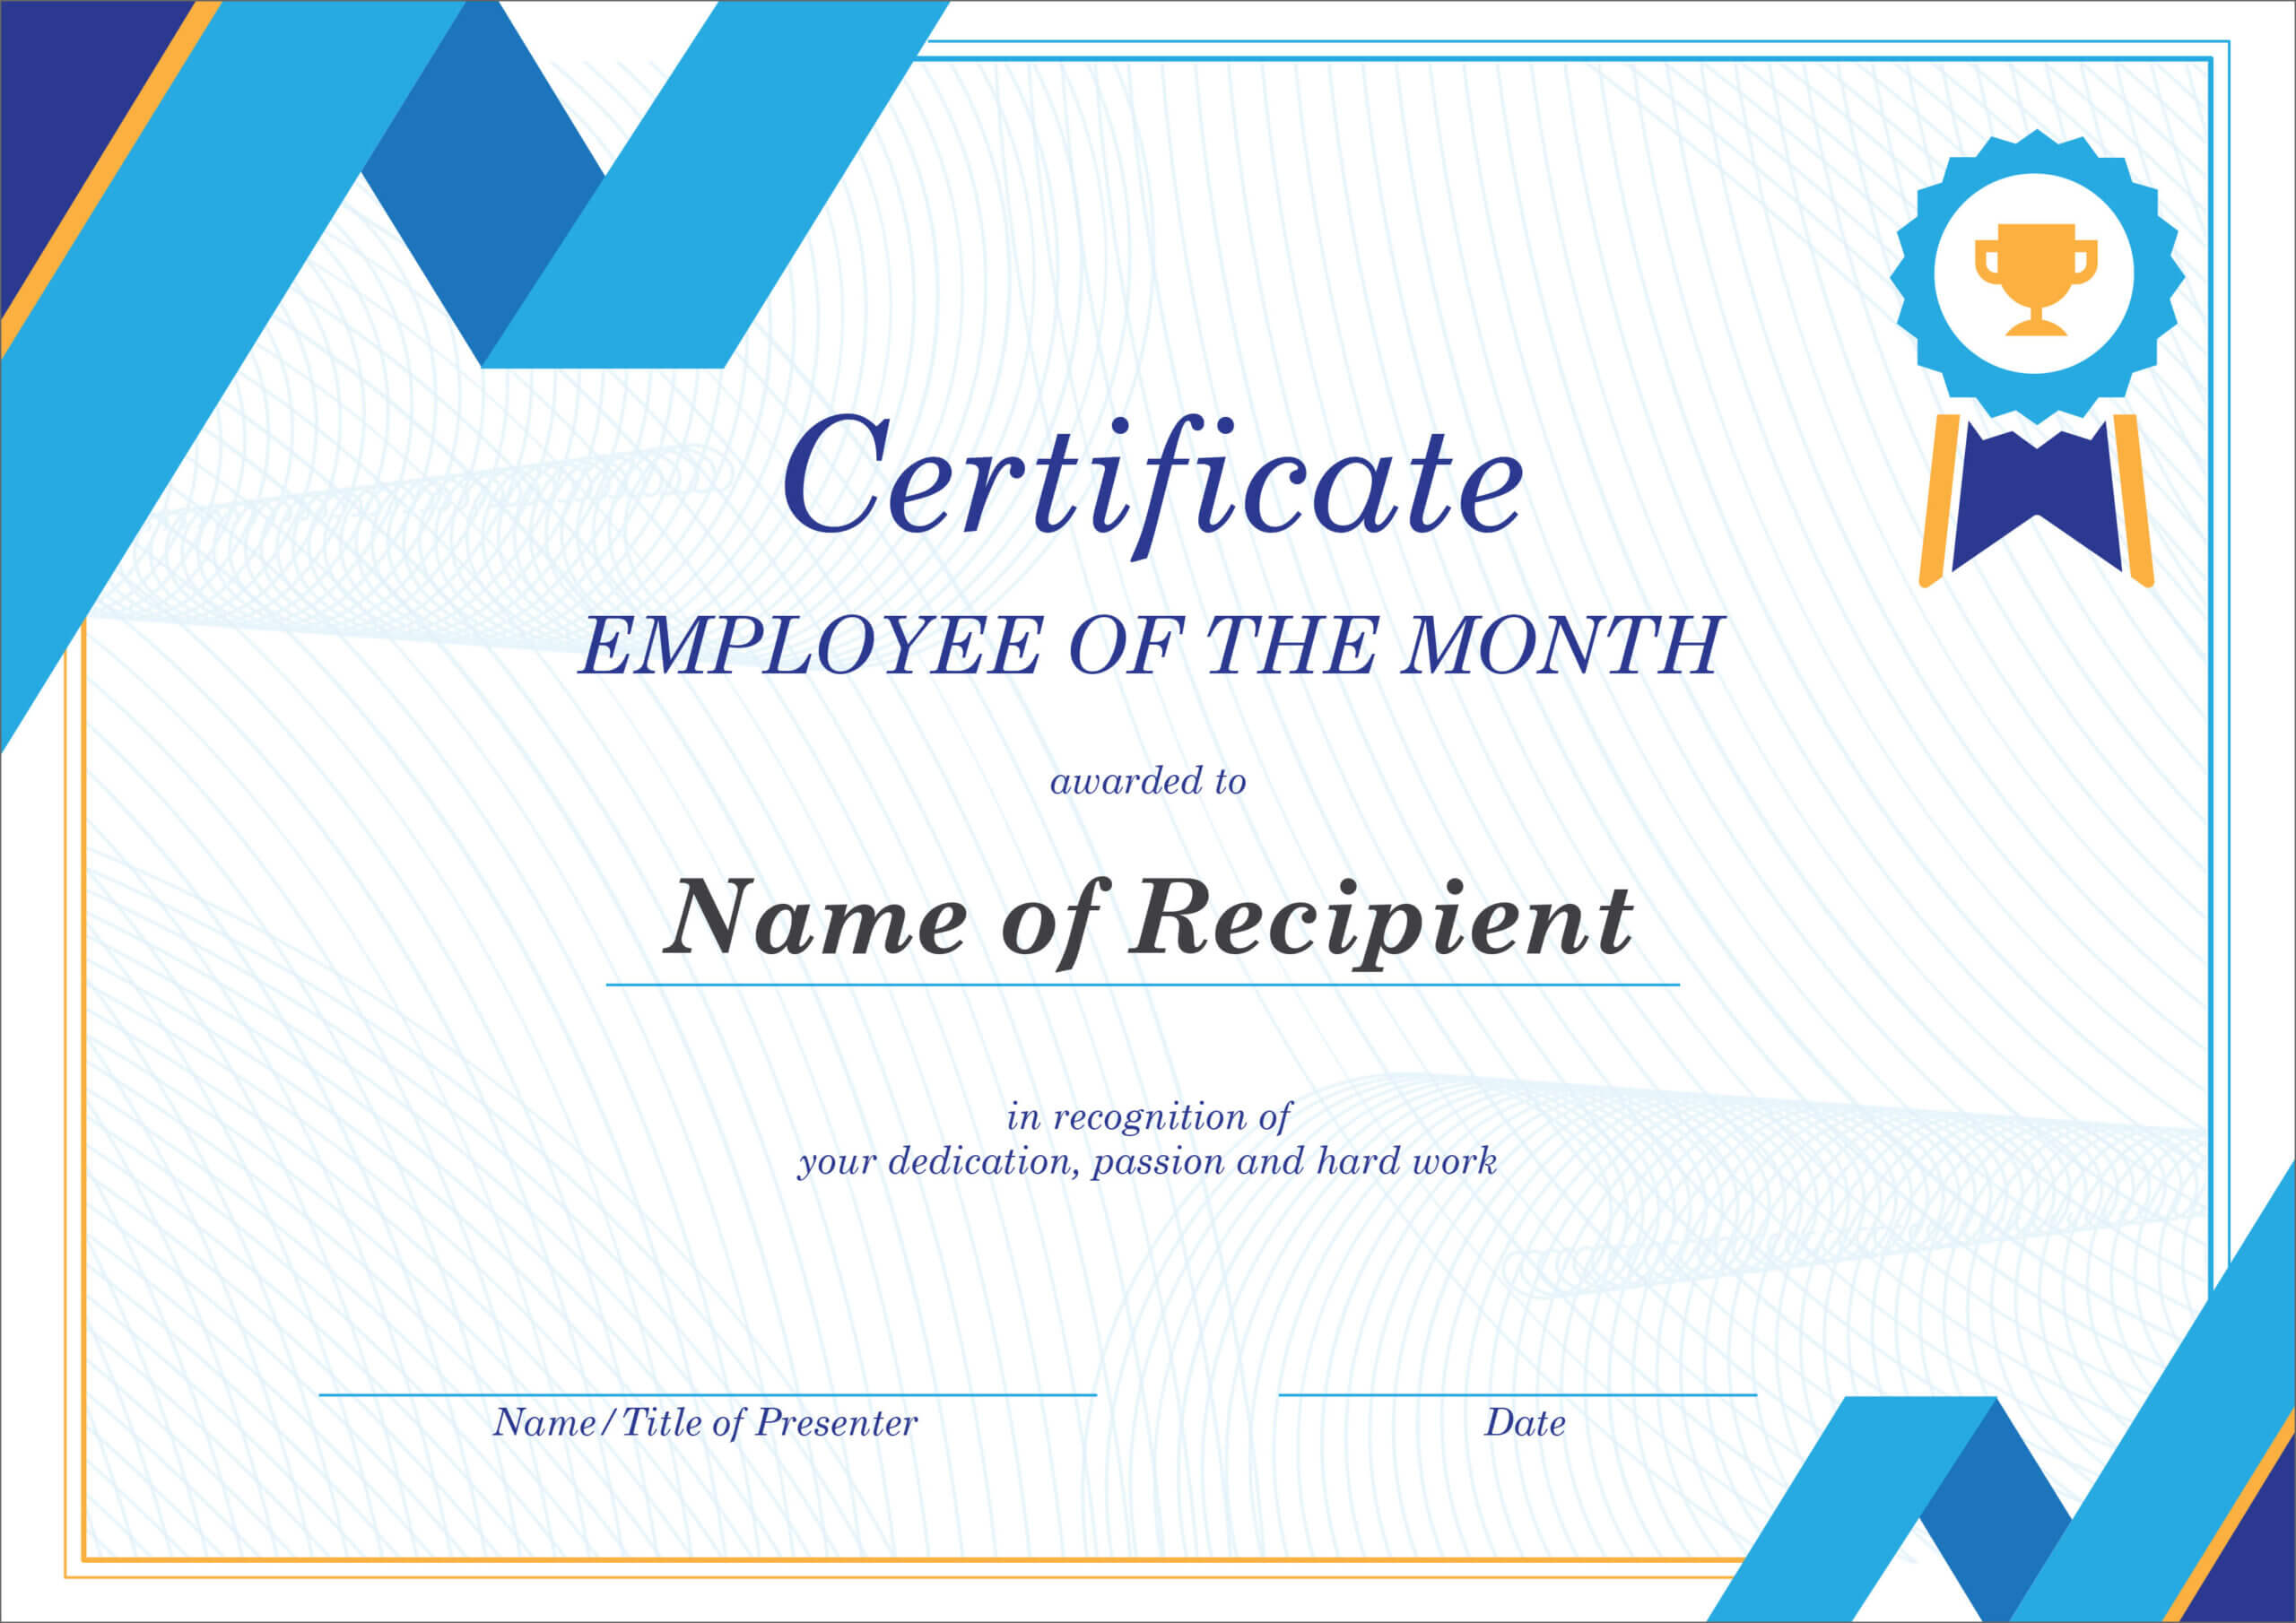 50 Free Creative Blank Certificate Templates In Psd For Employee Recognition Certificates